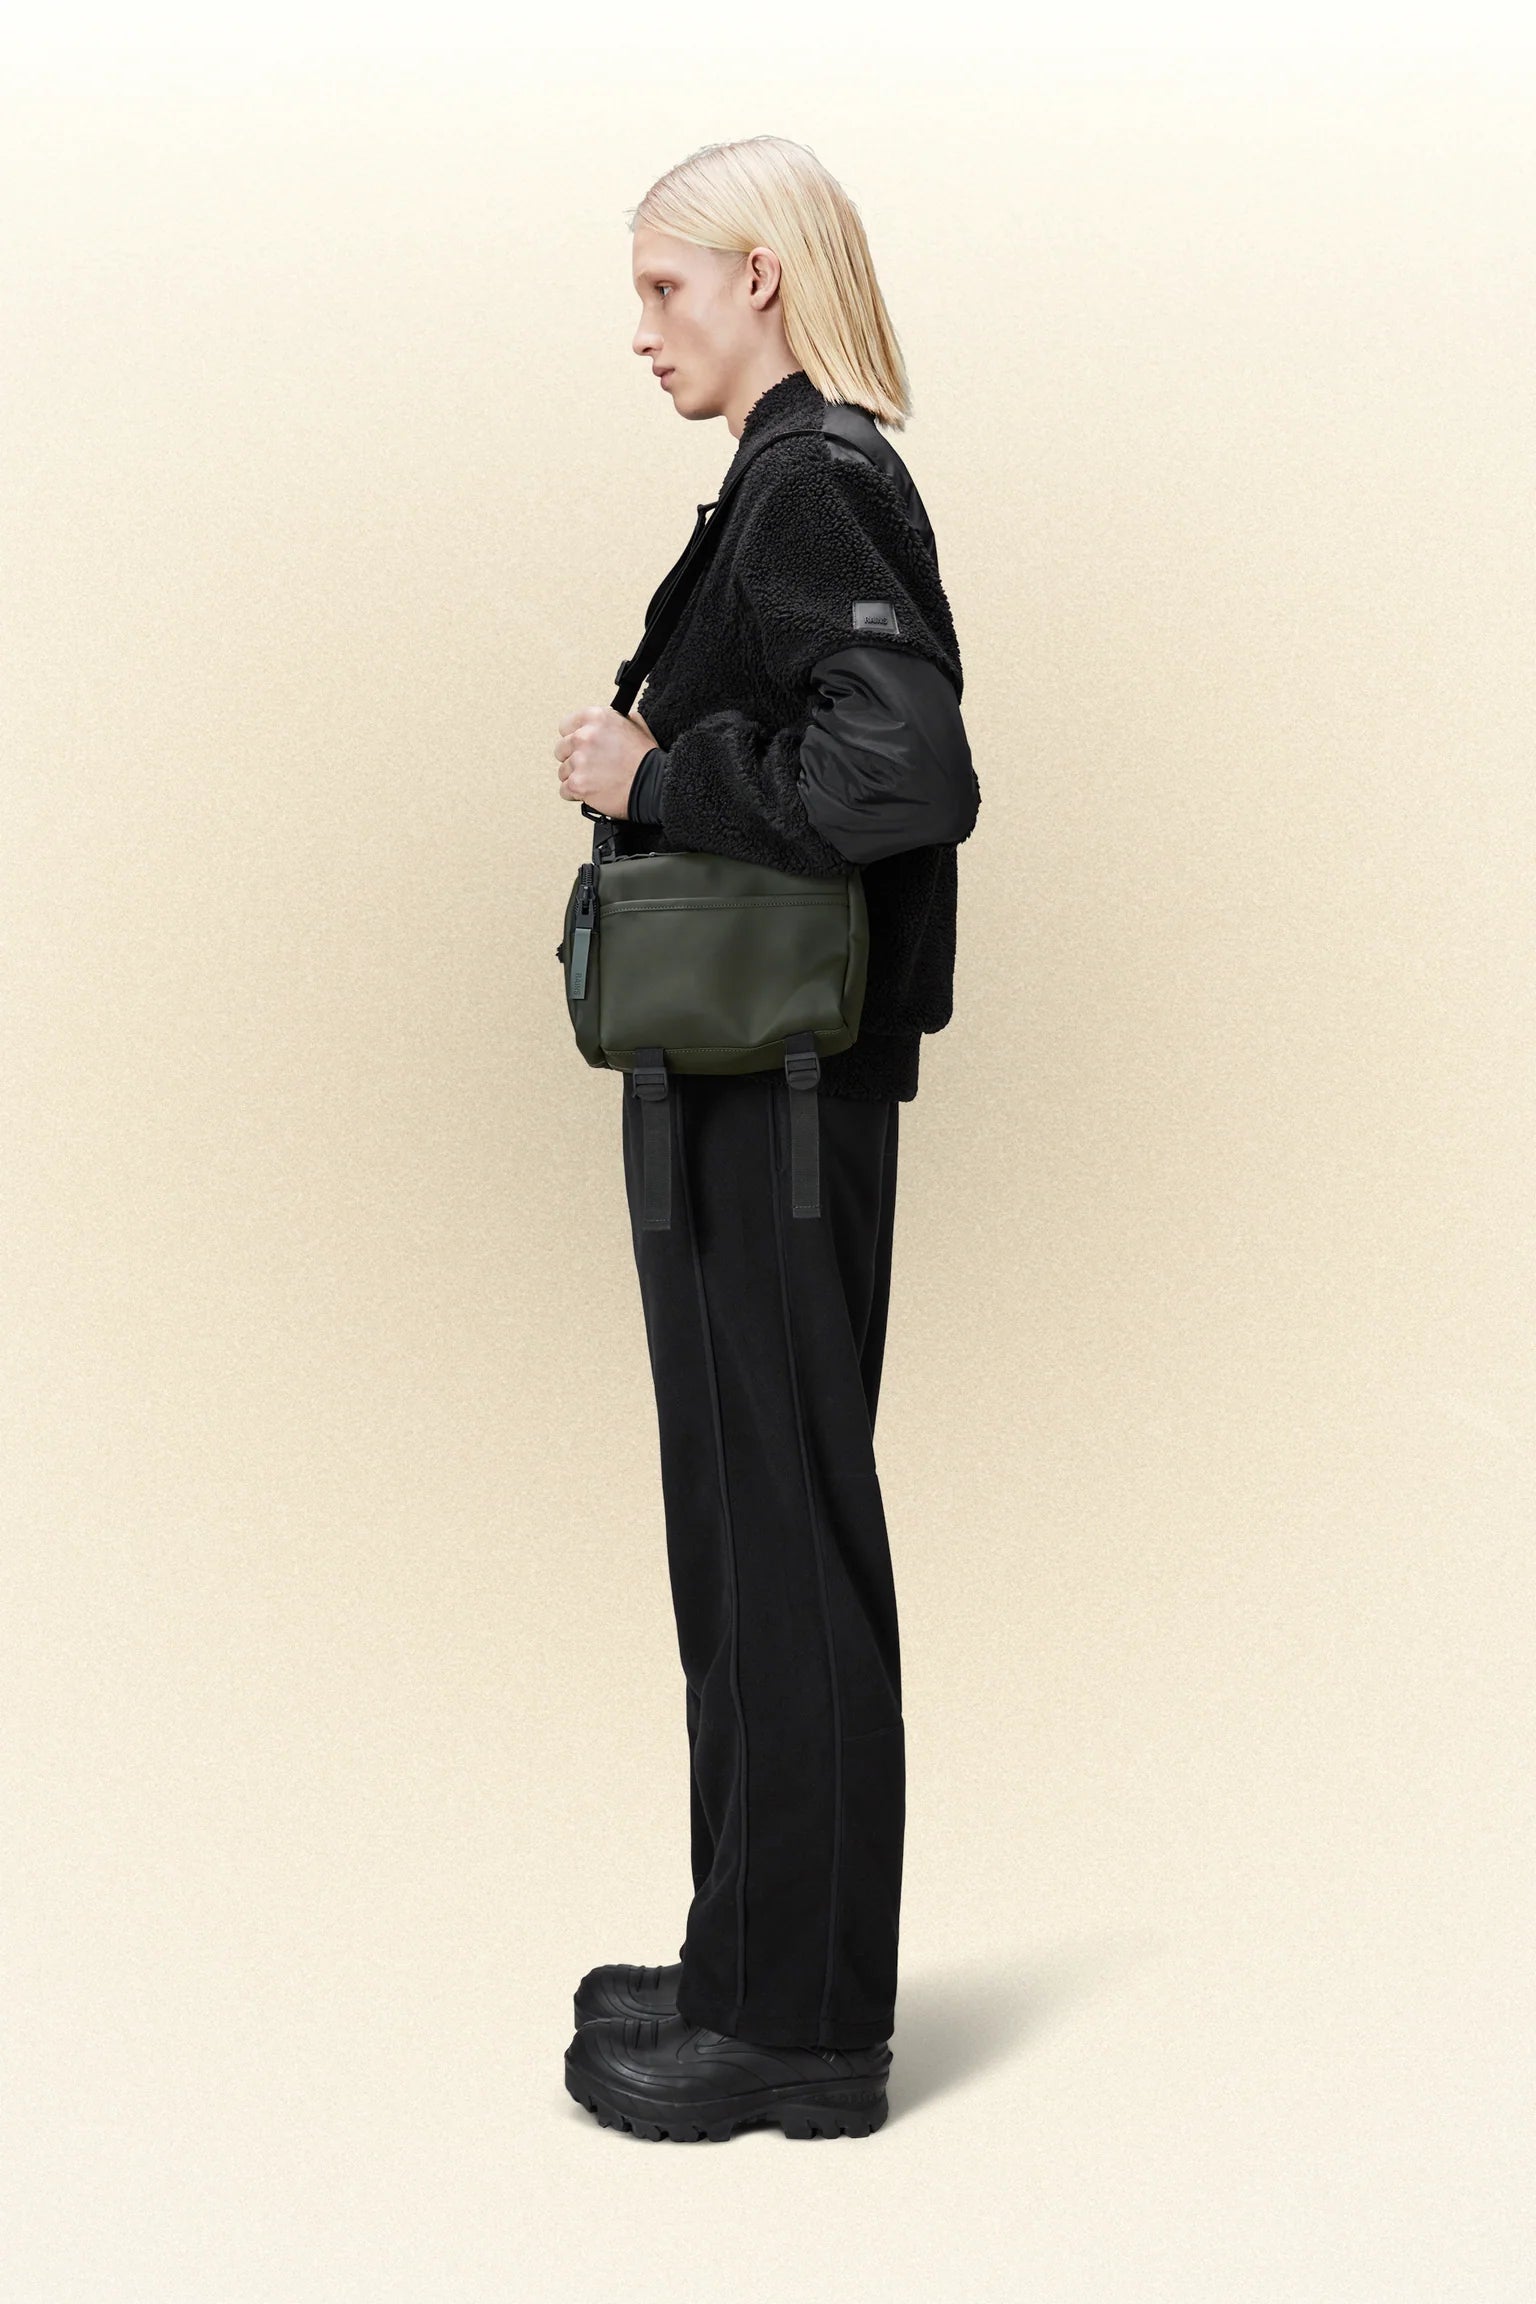 A woman wearing a black jacket and black pants with a waterproof black Rains texel crossbody bag in green, carrying her daily essentials.